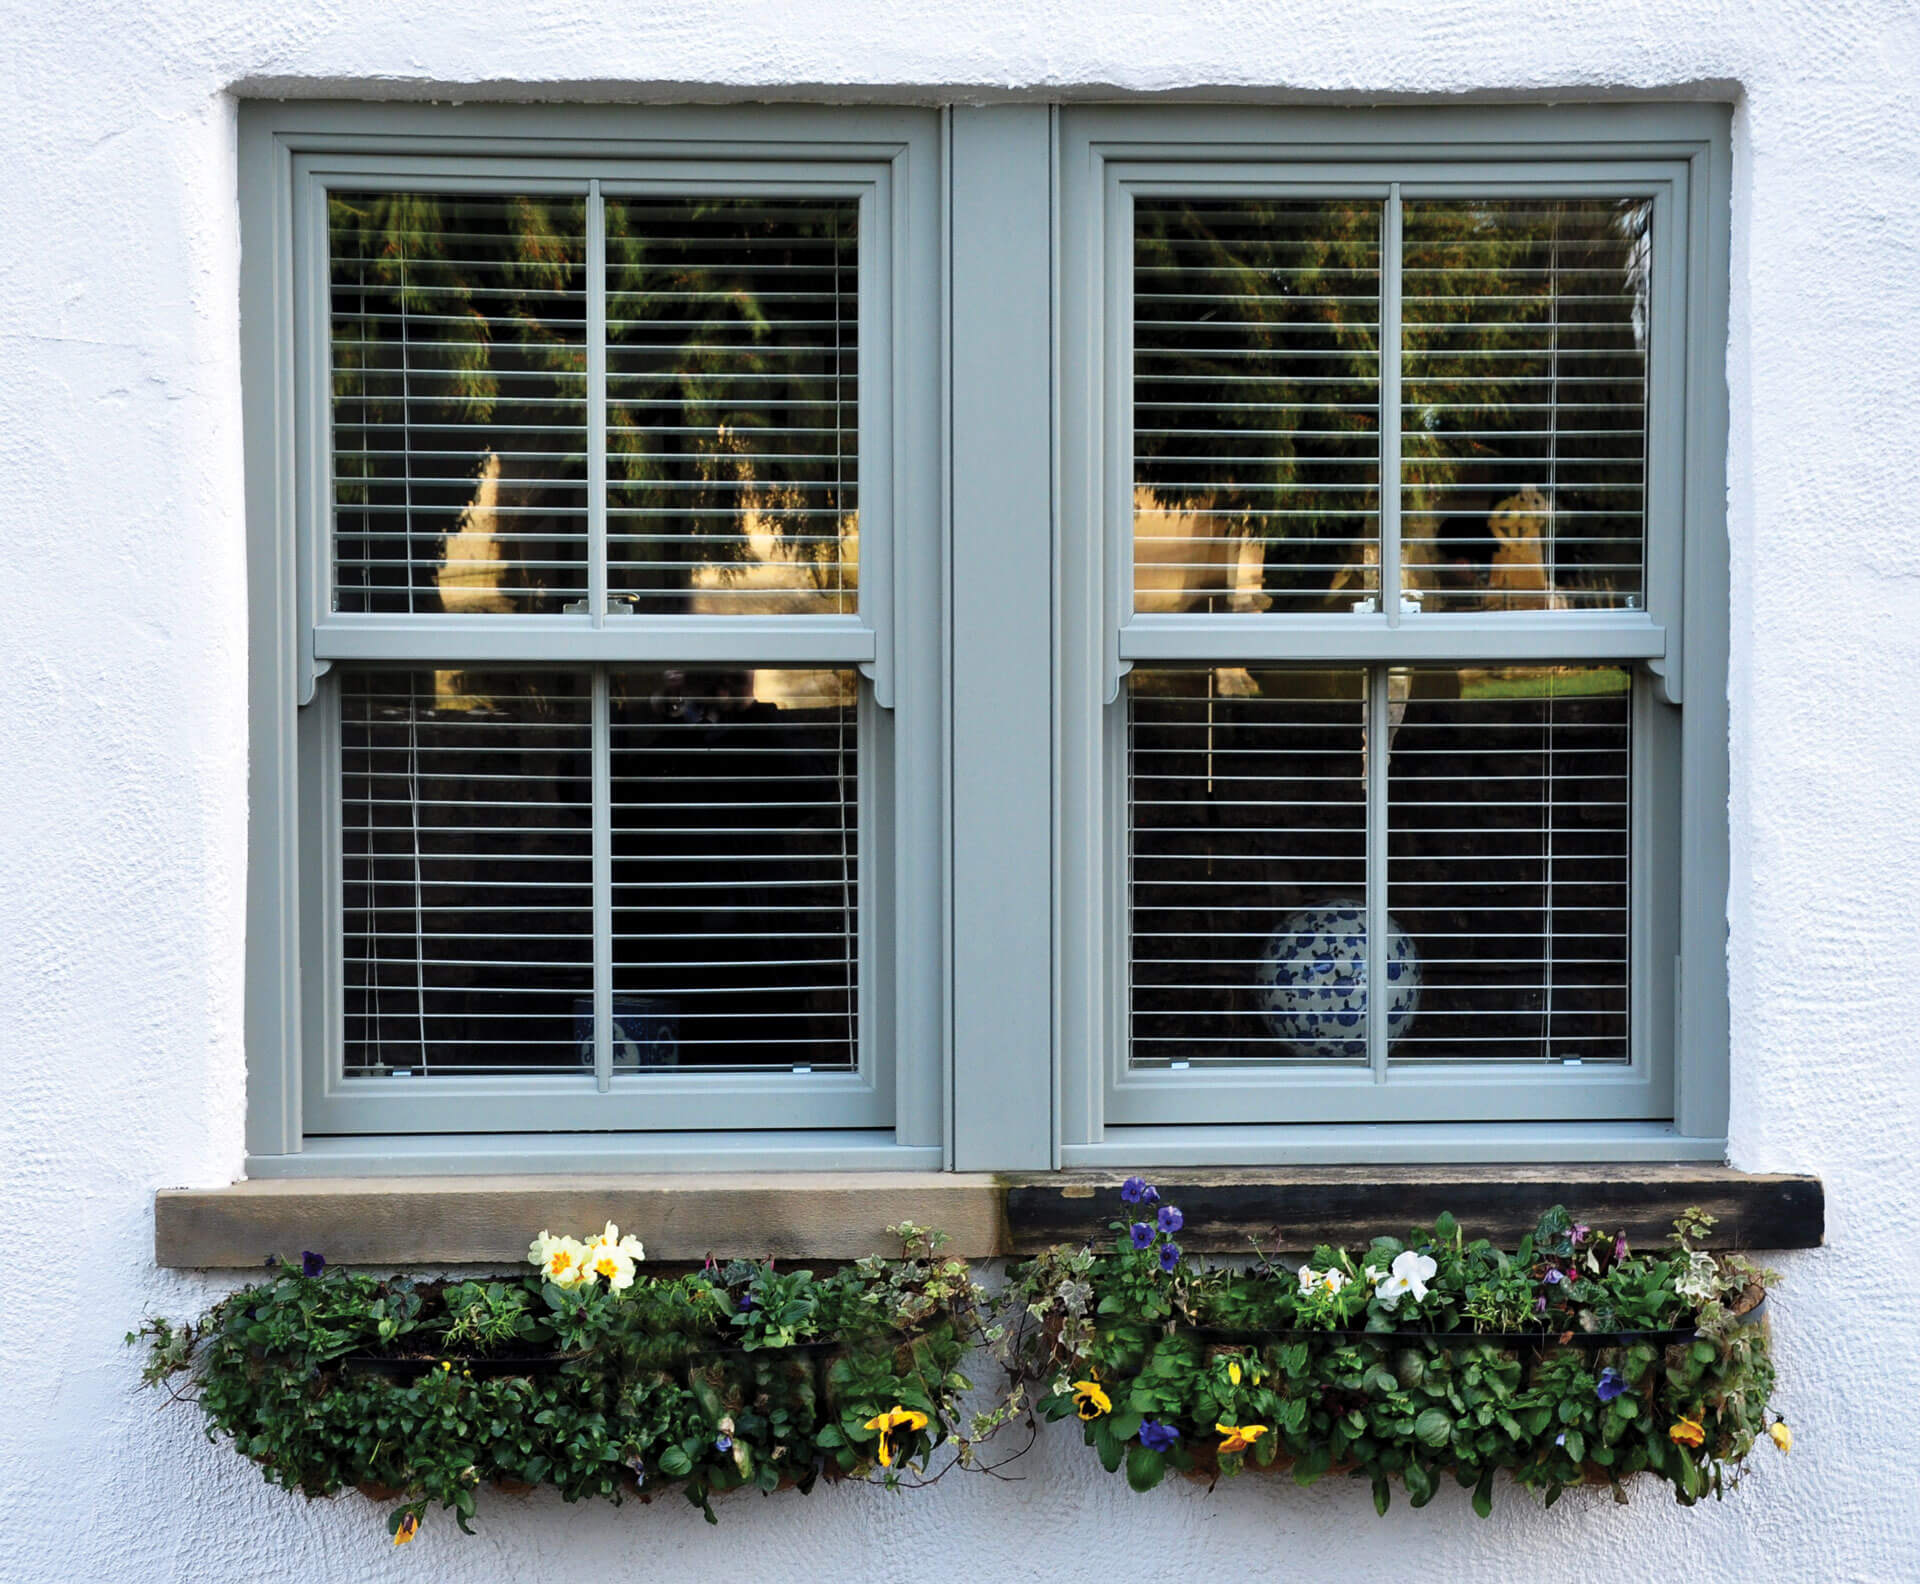 How Will Energy Efficient Windows Save You Money?